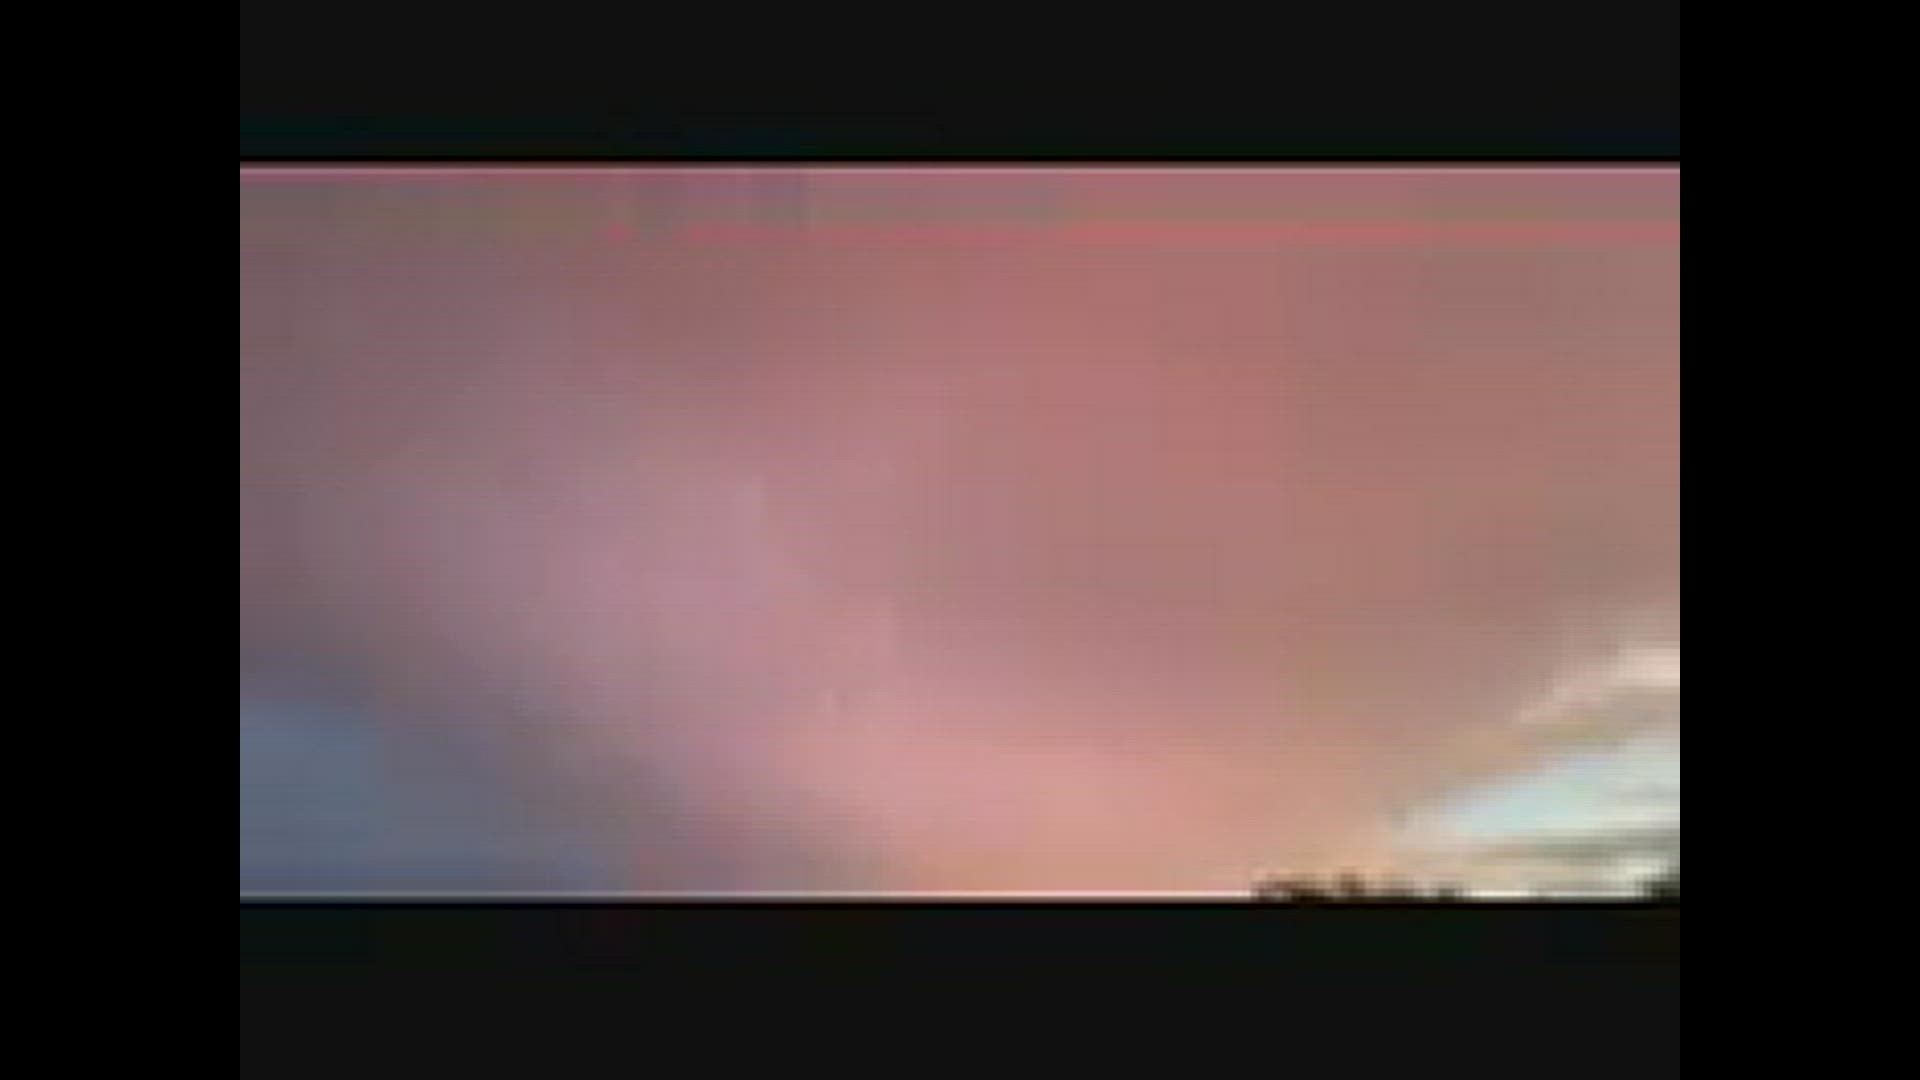 My 16 yr old son took this video in northeast Knoxville. His name is William Verges